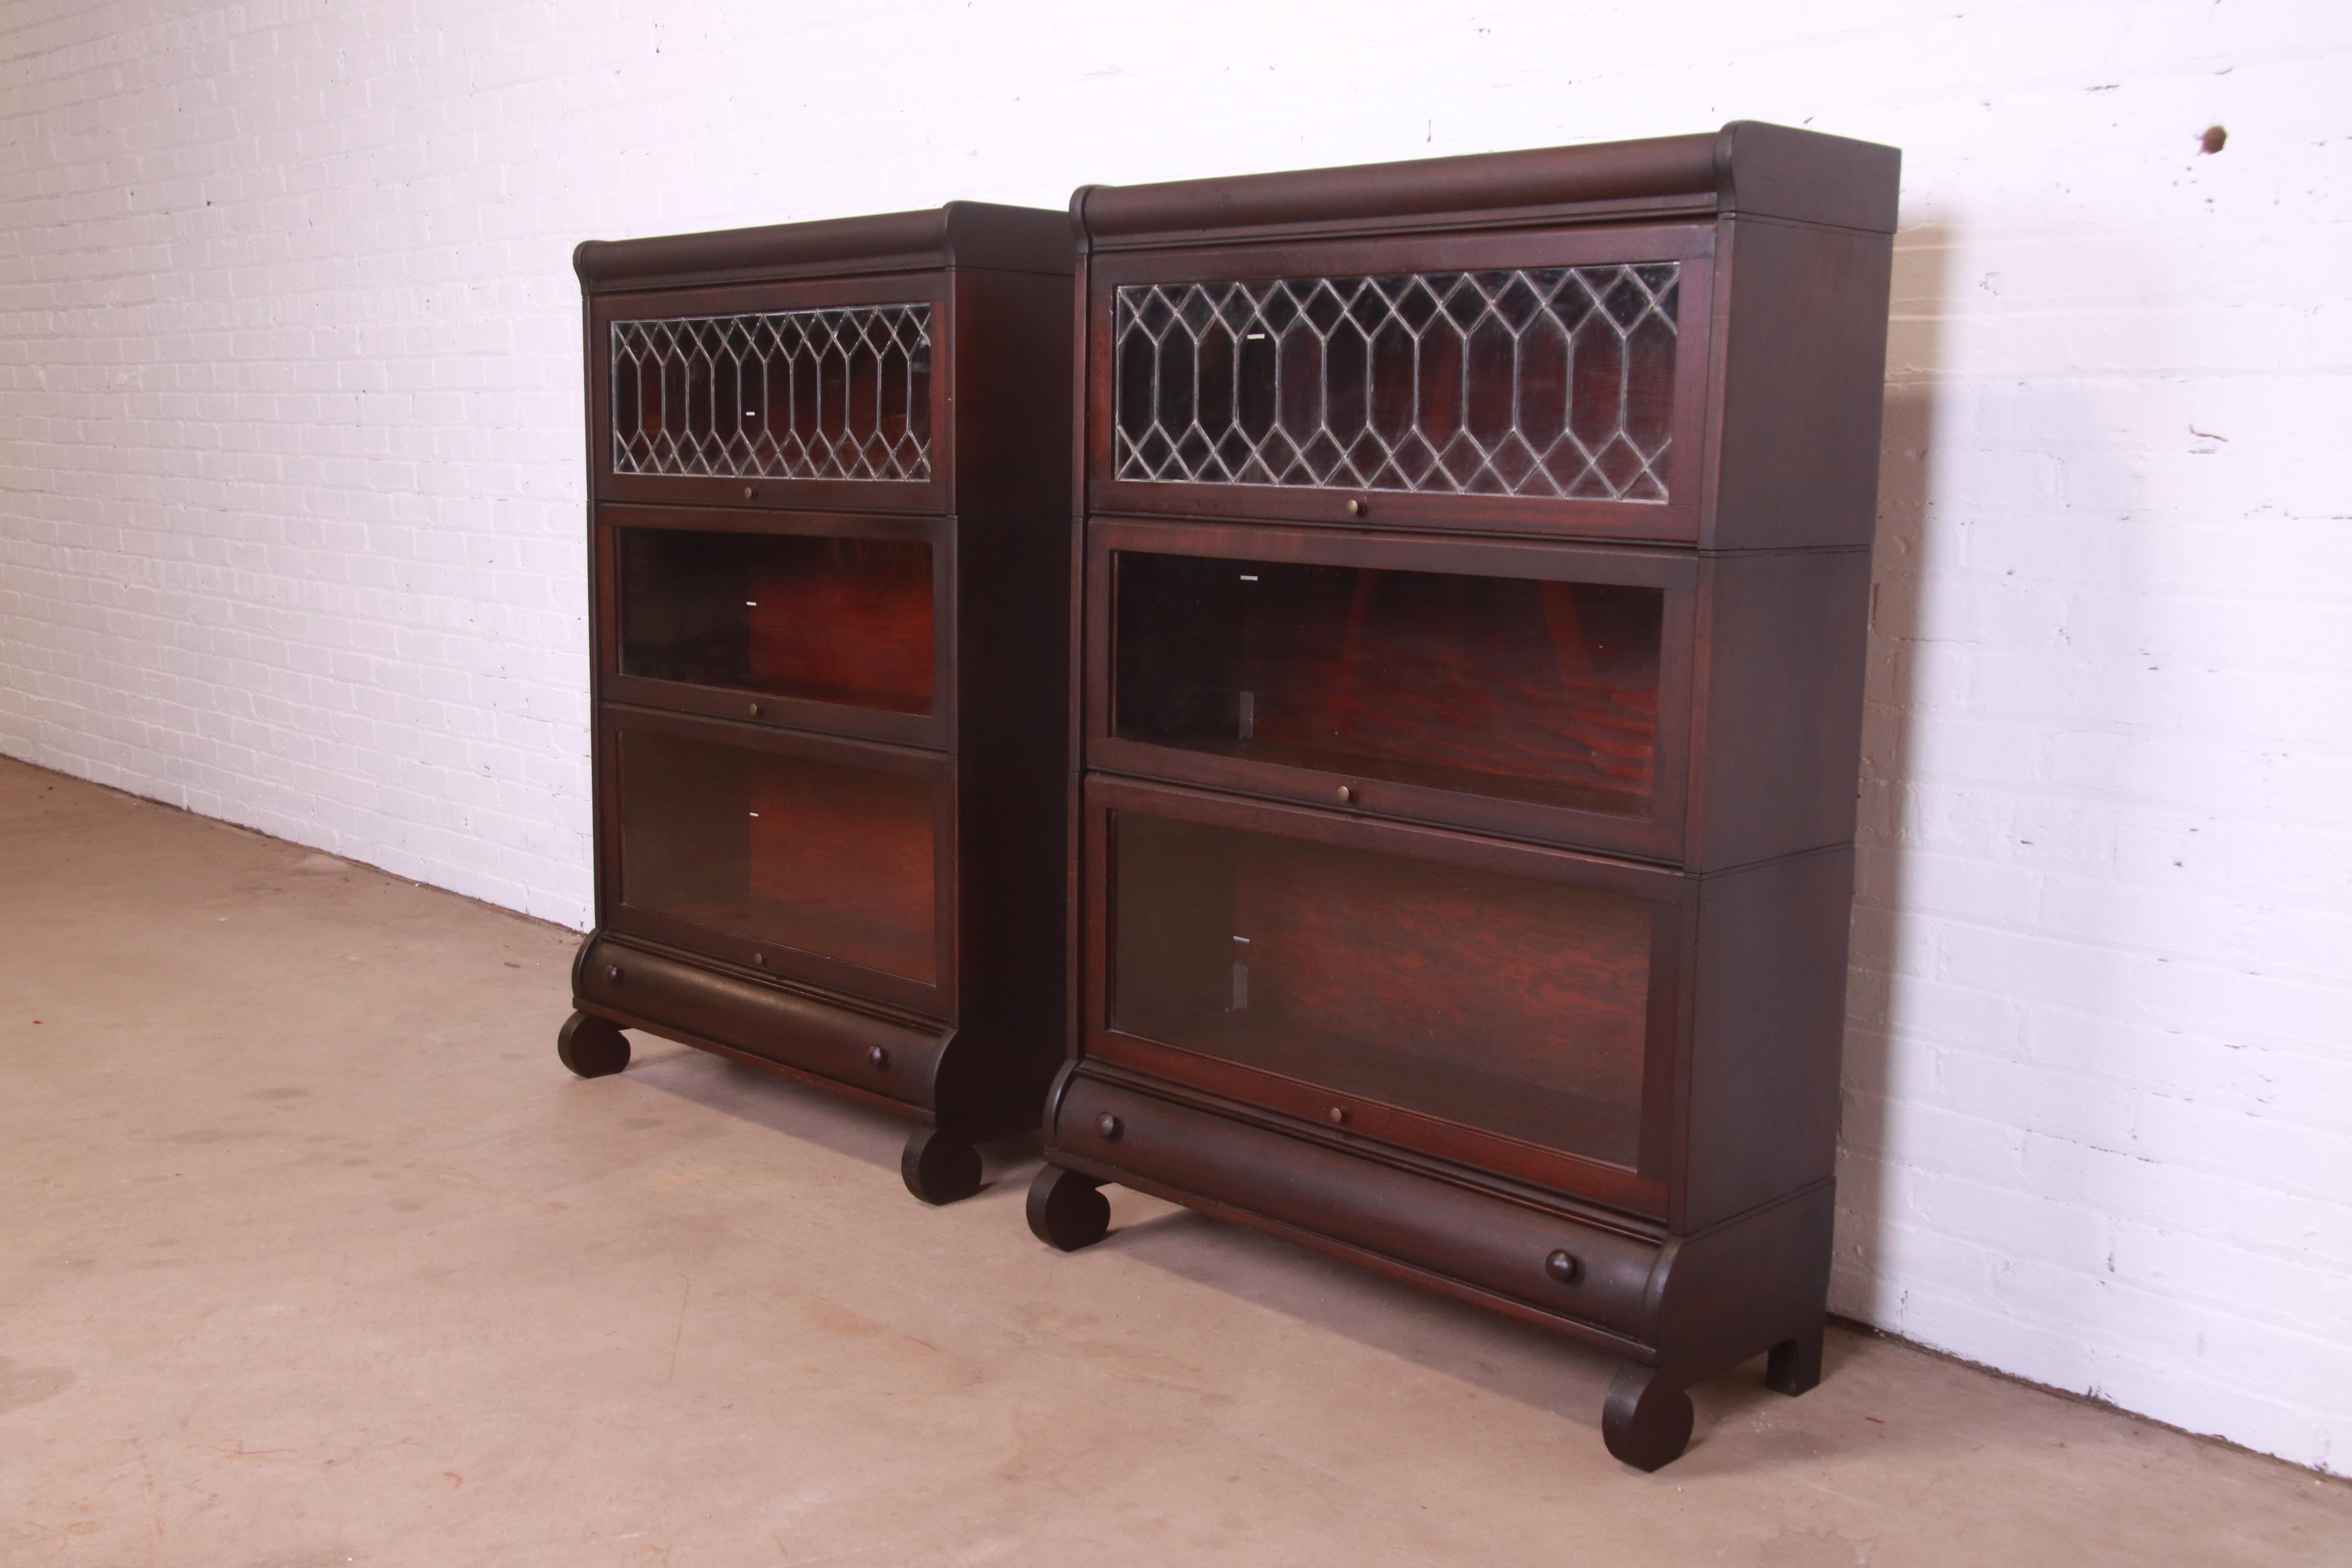 American Antique Arts & Crafts Mahogany Barrister Bookcases with Leaded Glass, Pair